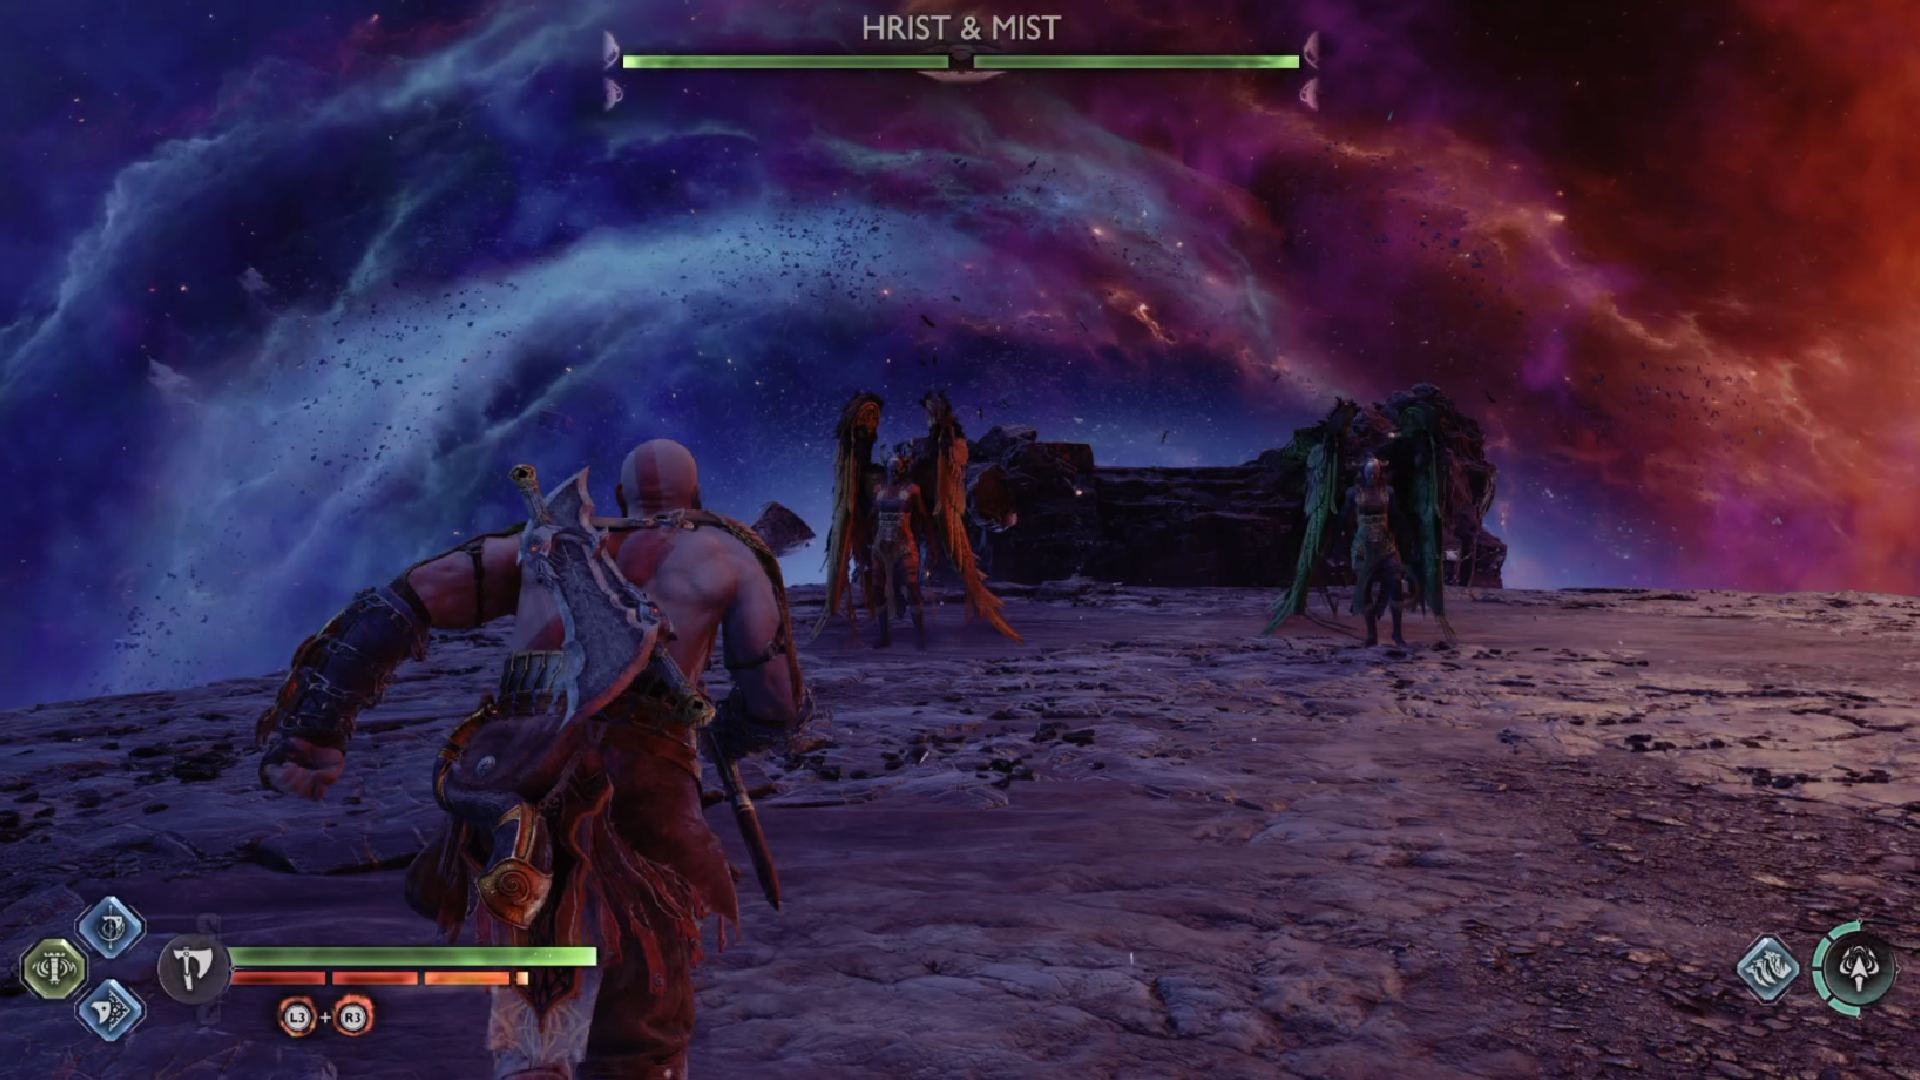 God of War Ragnarok Gale Flames Locations: Hrist and Mist can be seen